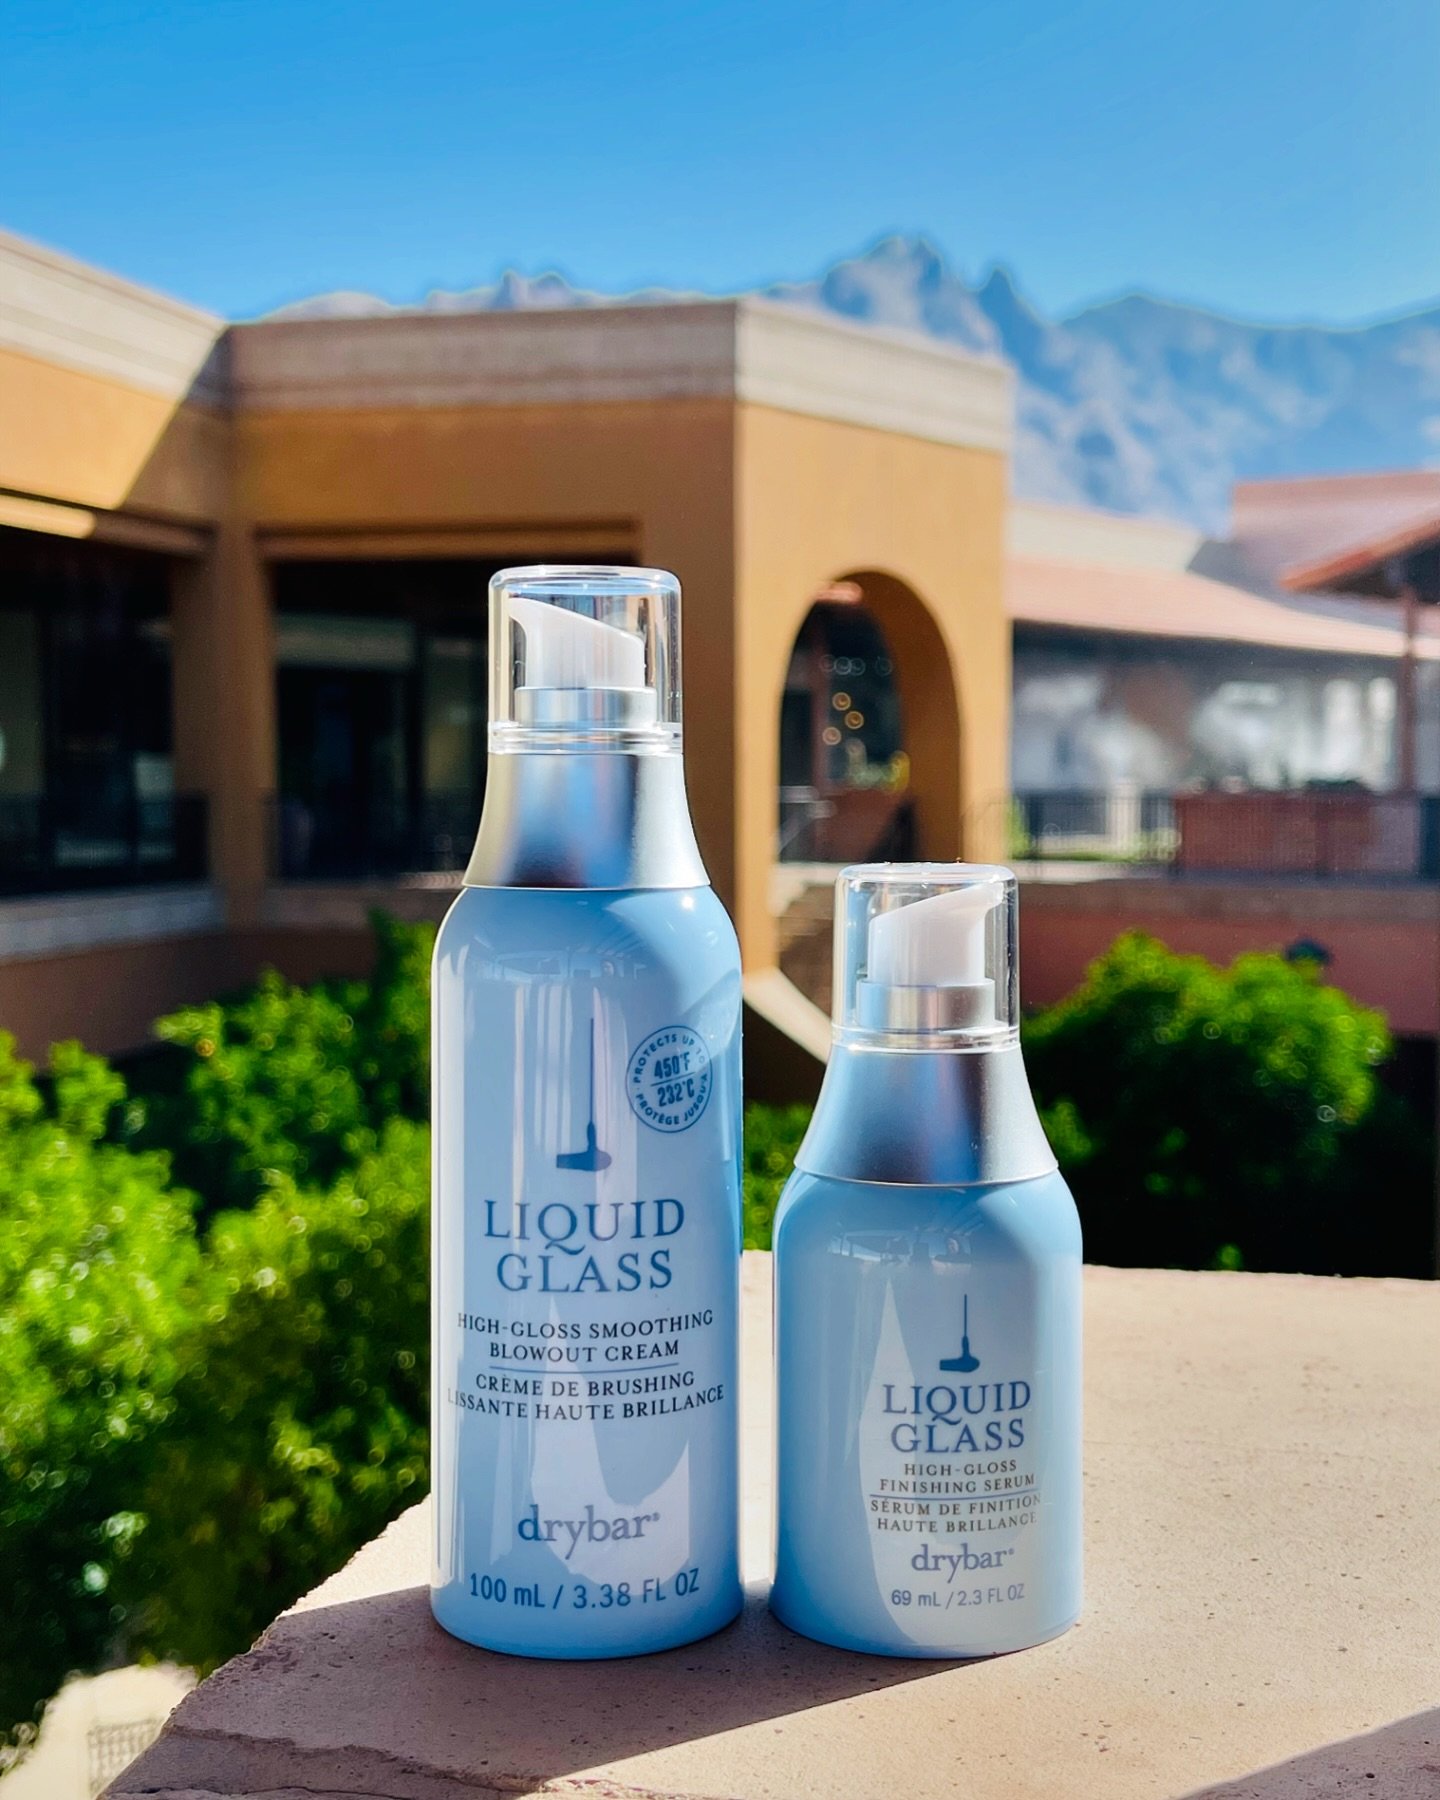 ✨ Introducing our Weekly Spotlight Product! We are serving up The Liquid Glass High-Gloss Smoothing Blowout Cream &amp; The Liquid Glass High-Gloss Finishing Serum✨ Say hello to smoother styles and high-shine finishes with our lightweight formula des